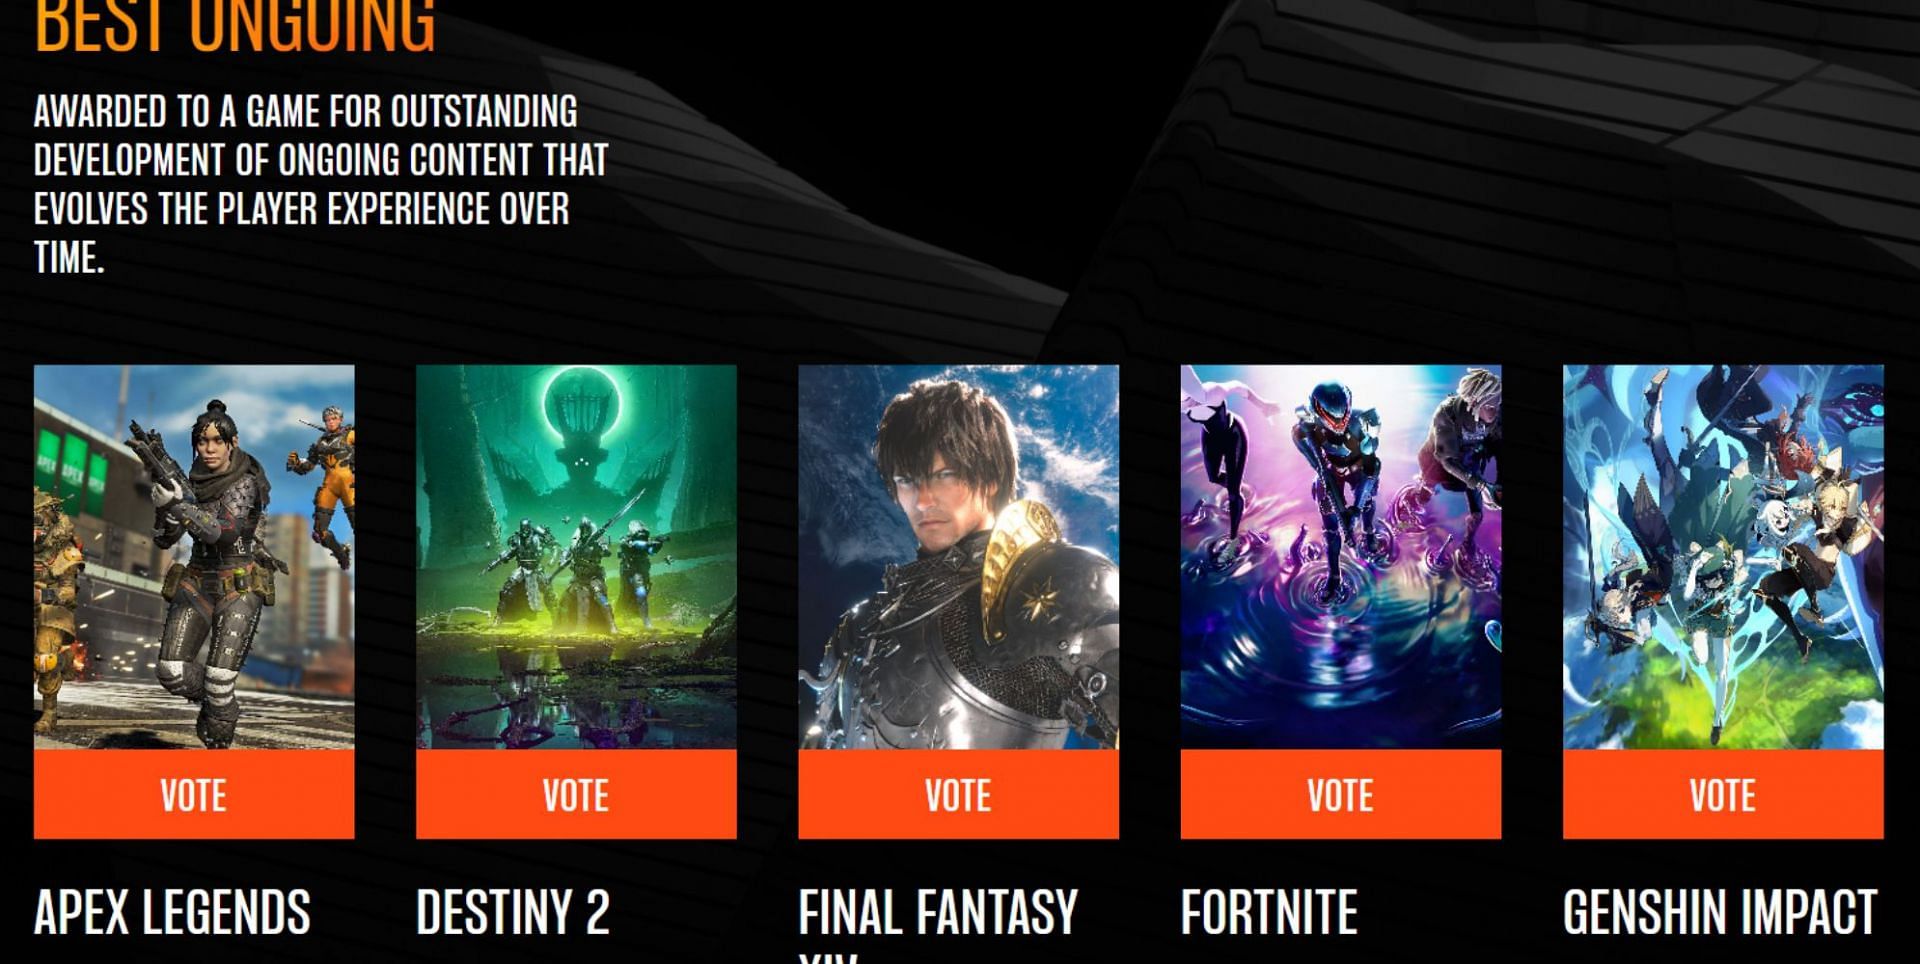 Genshin Impact at The Game Awards 2022: How to vote and all nominations